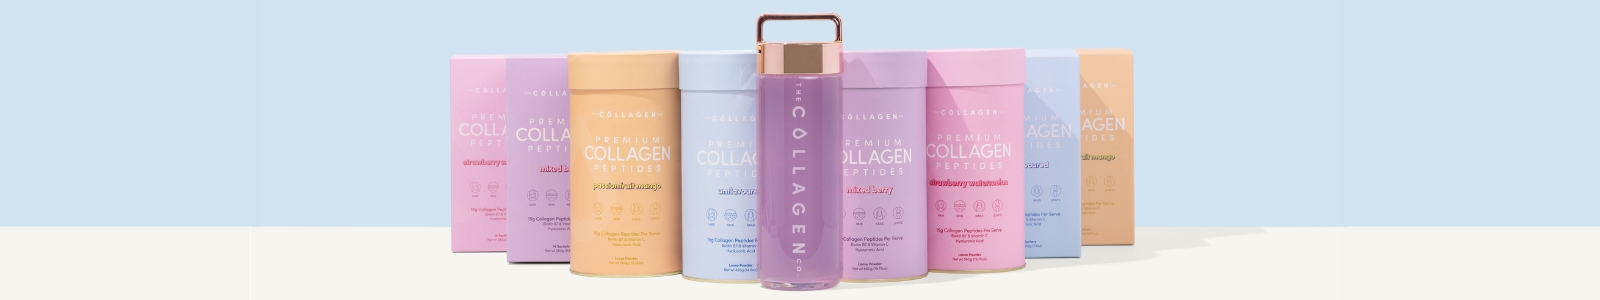 The Collagen Co's banner